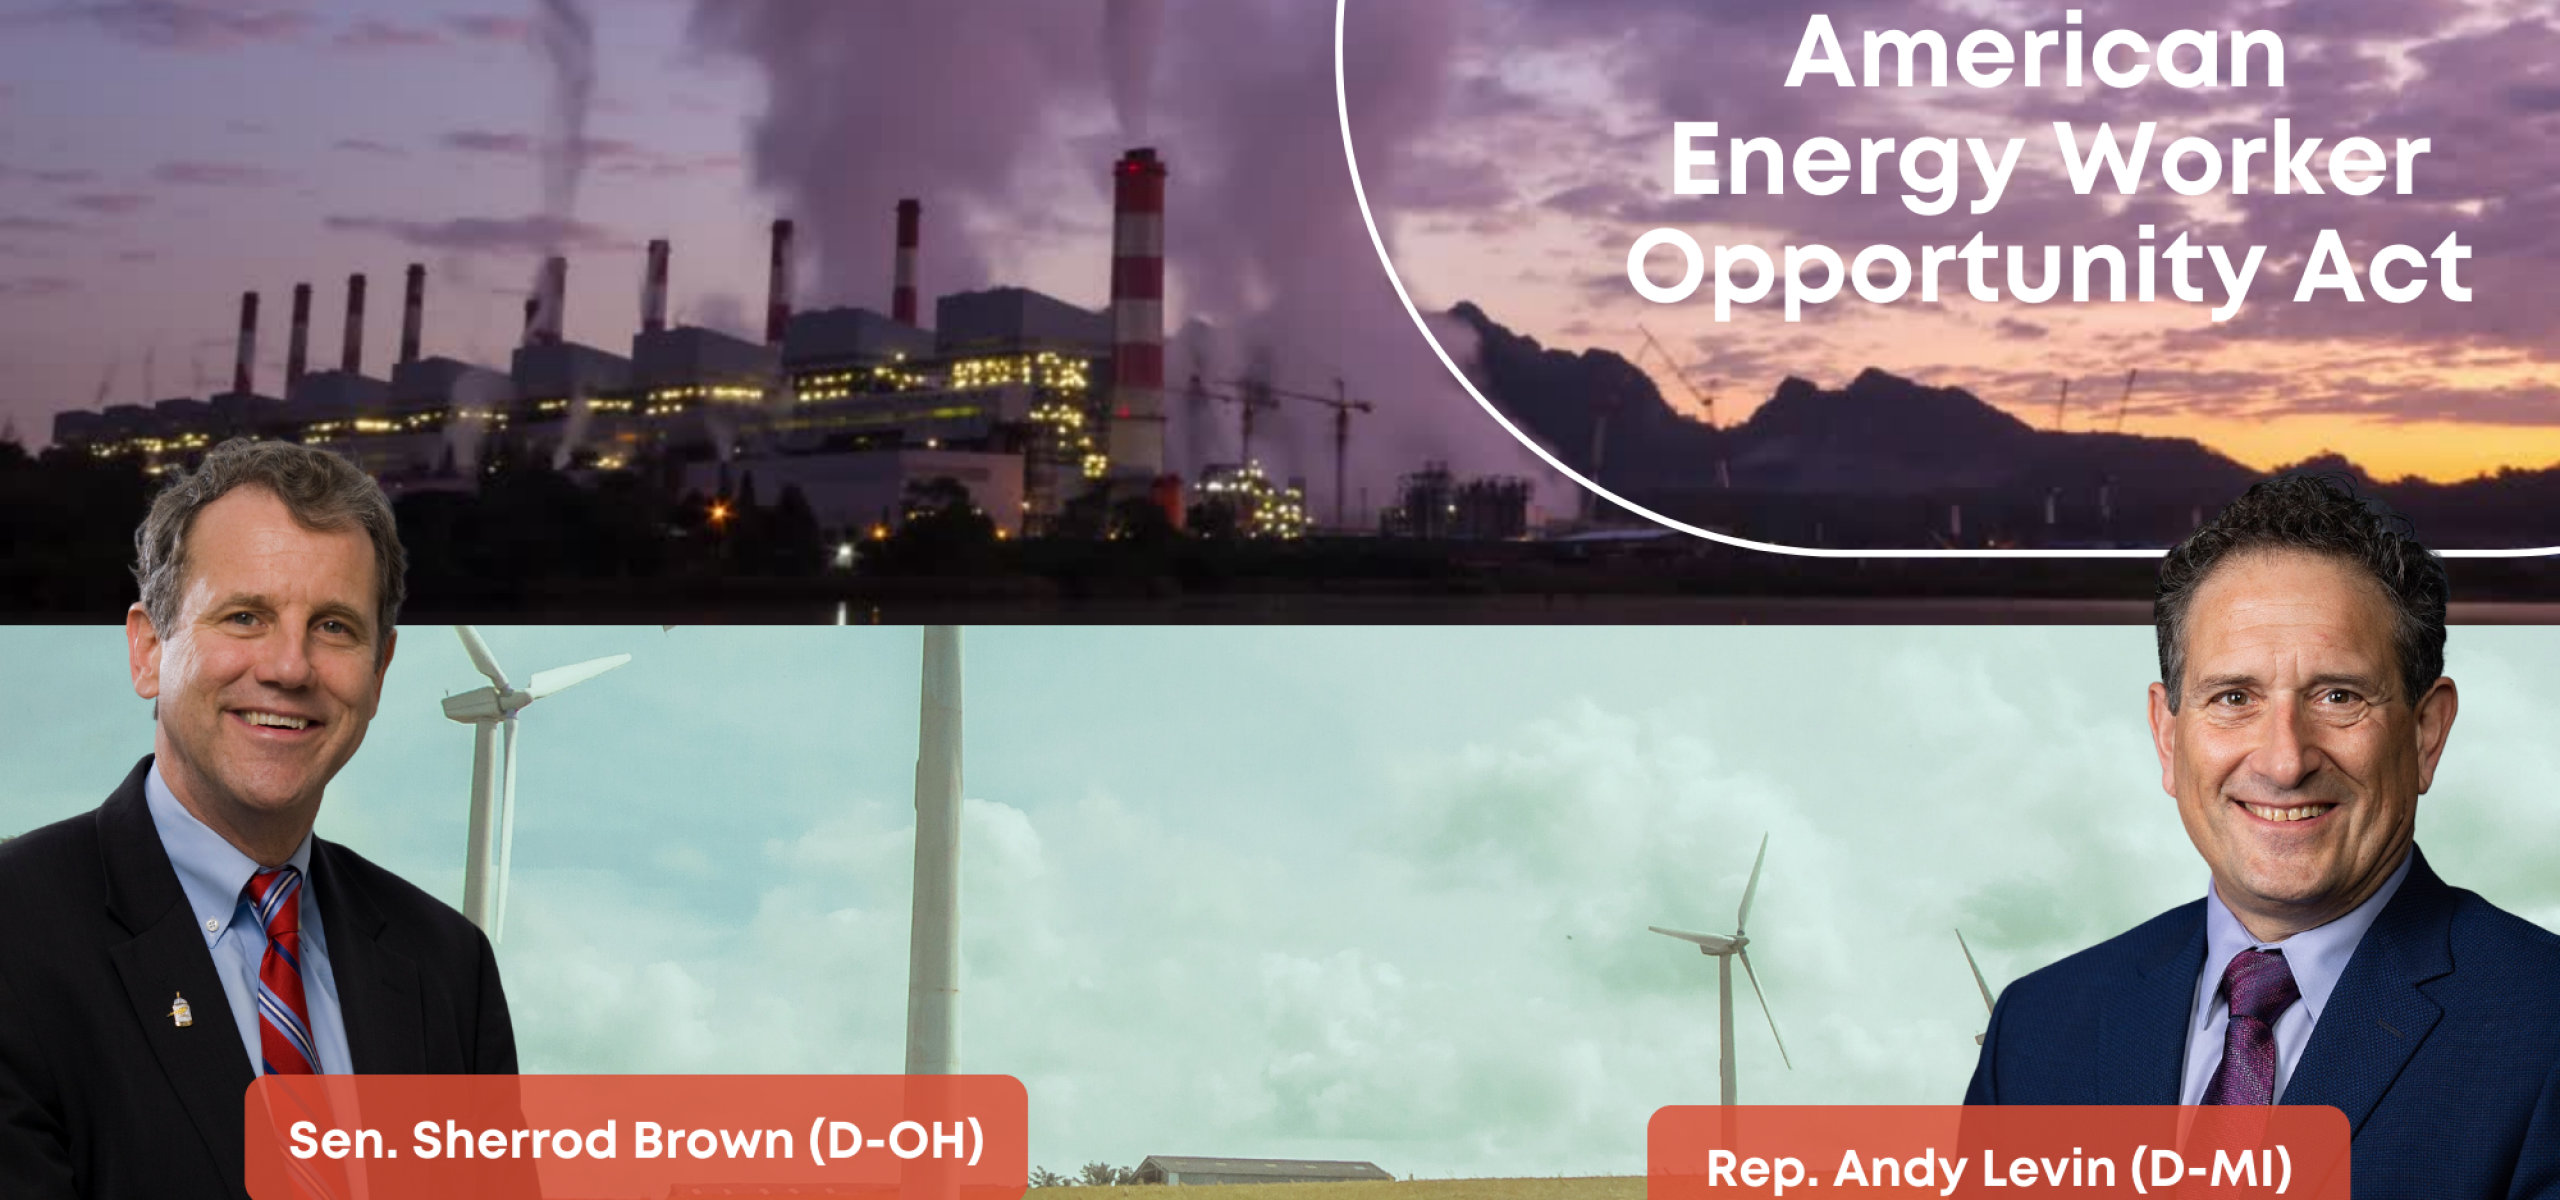 American Energy Worker Opportunity Act